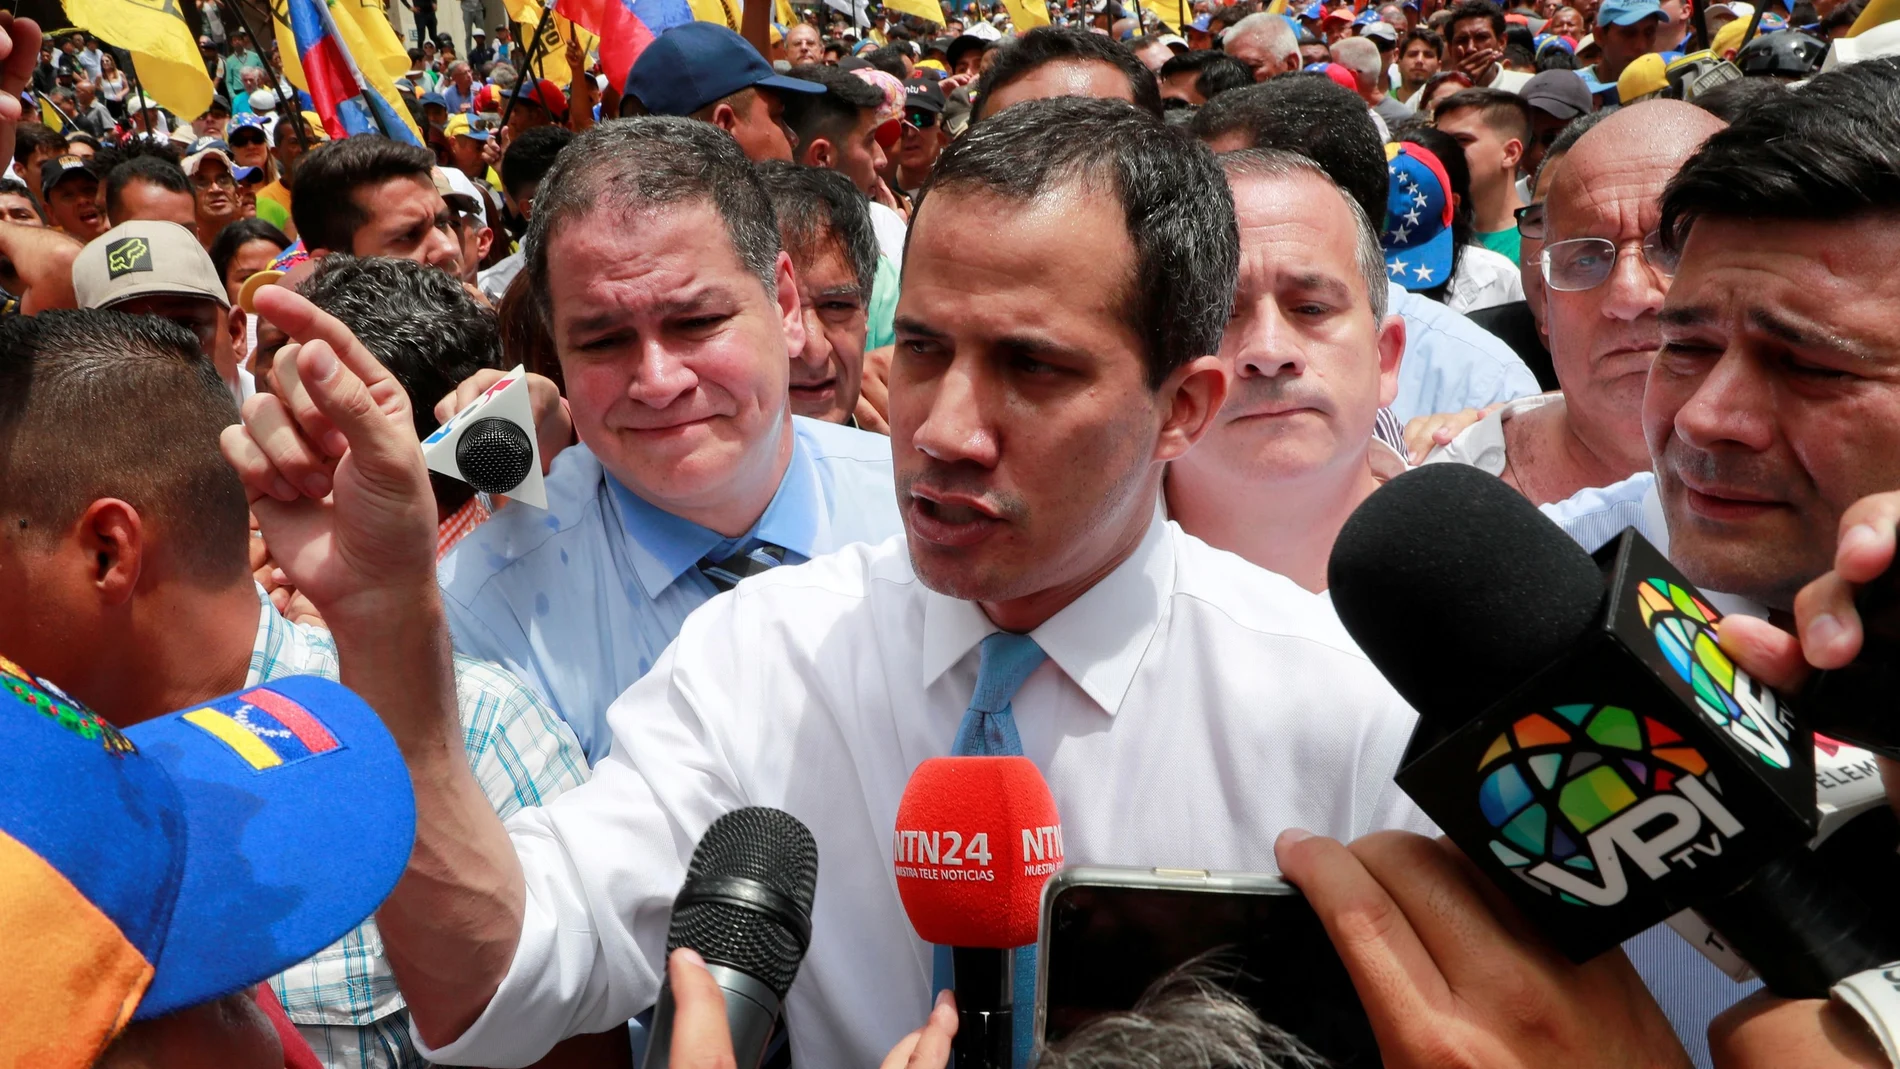 FILE PHOTO: Venezuela's National Assembly President and opposition leader Juan Guaido, who many nations have recognised as the country's rightful interim ruler, takes part in a demonstration in Caracas